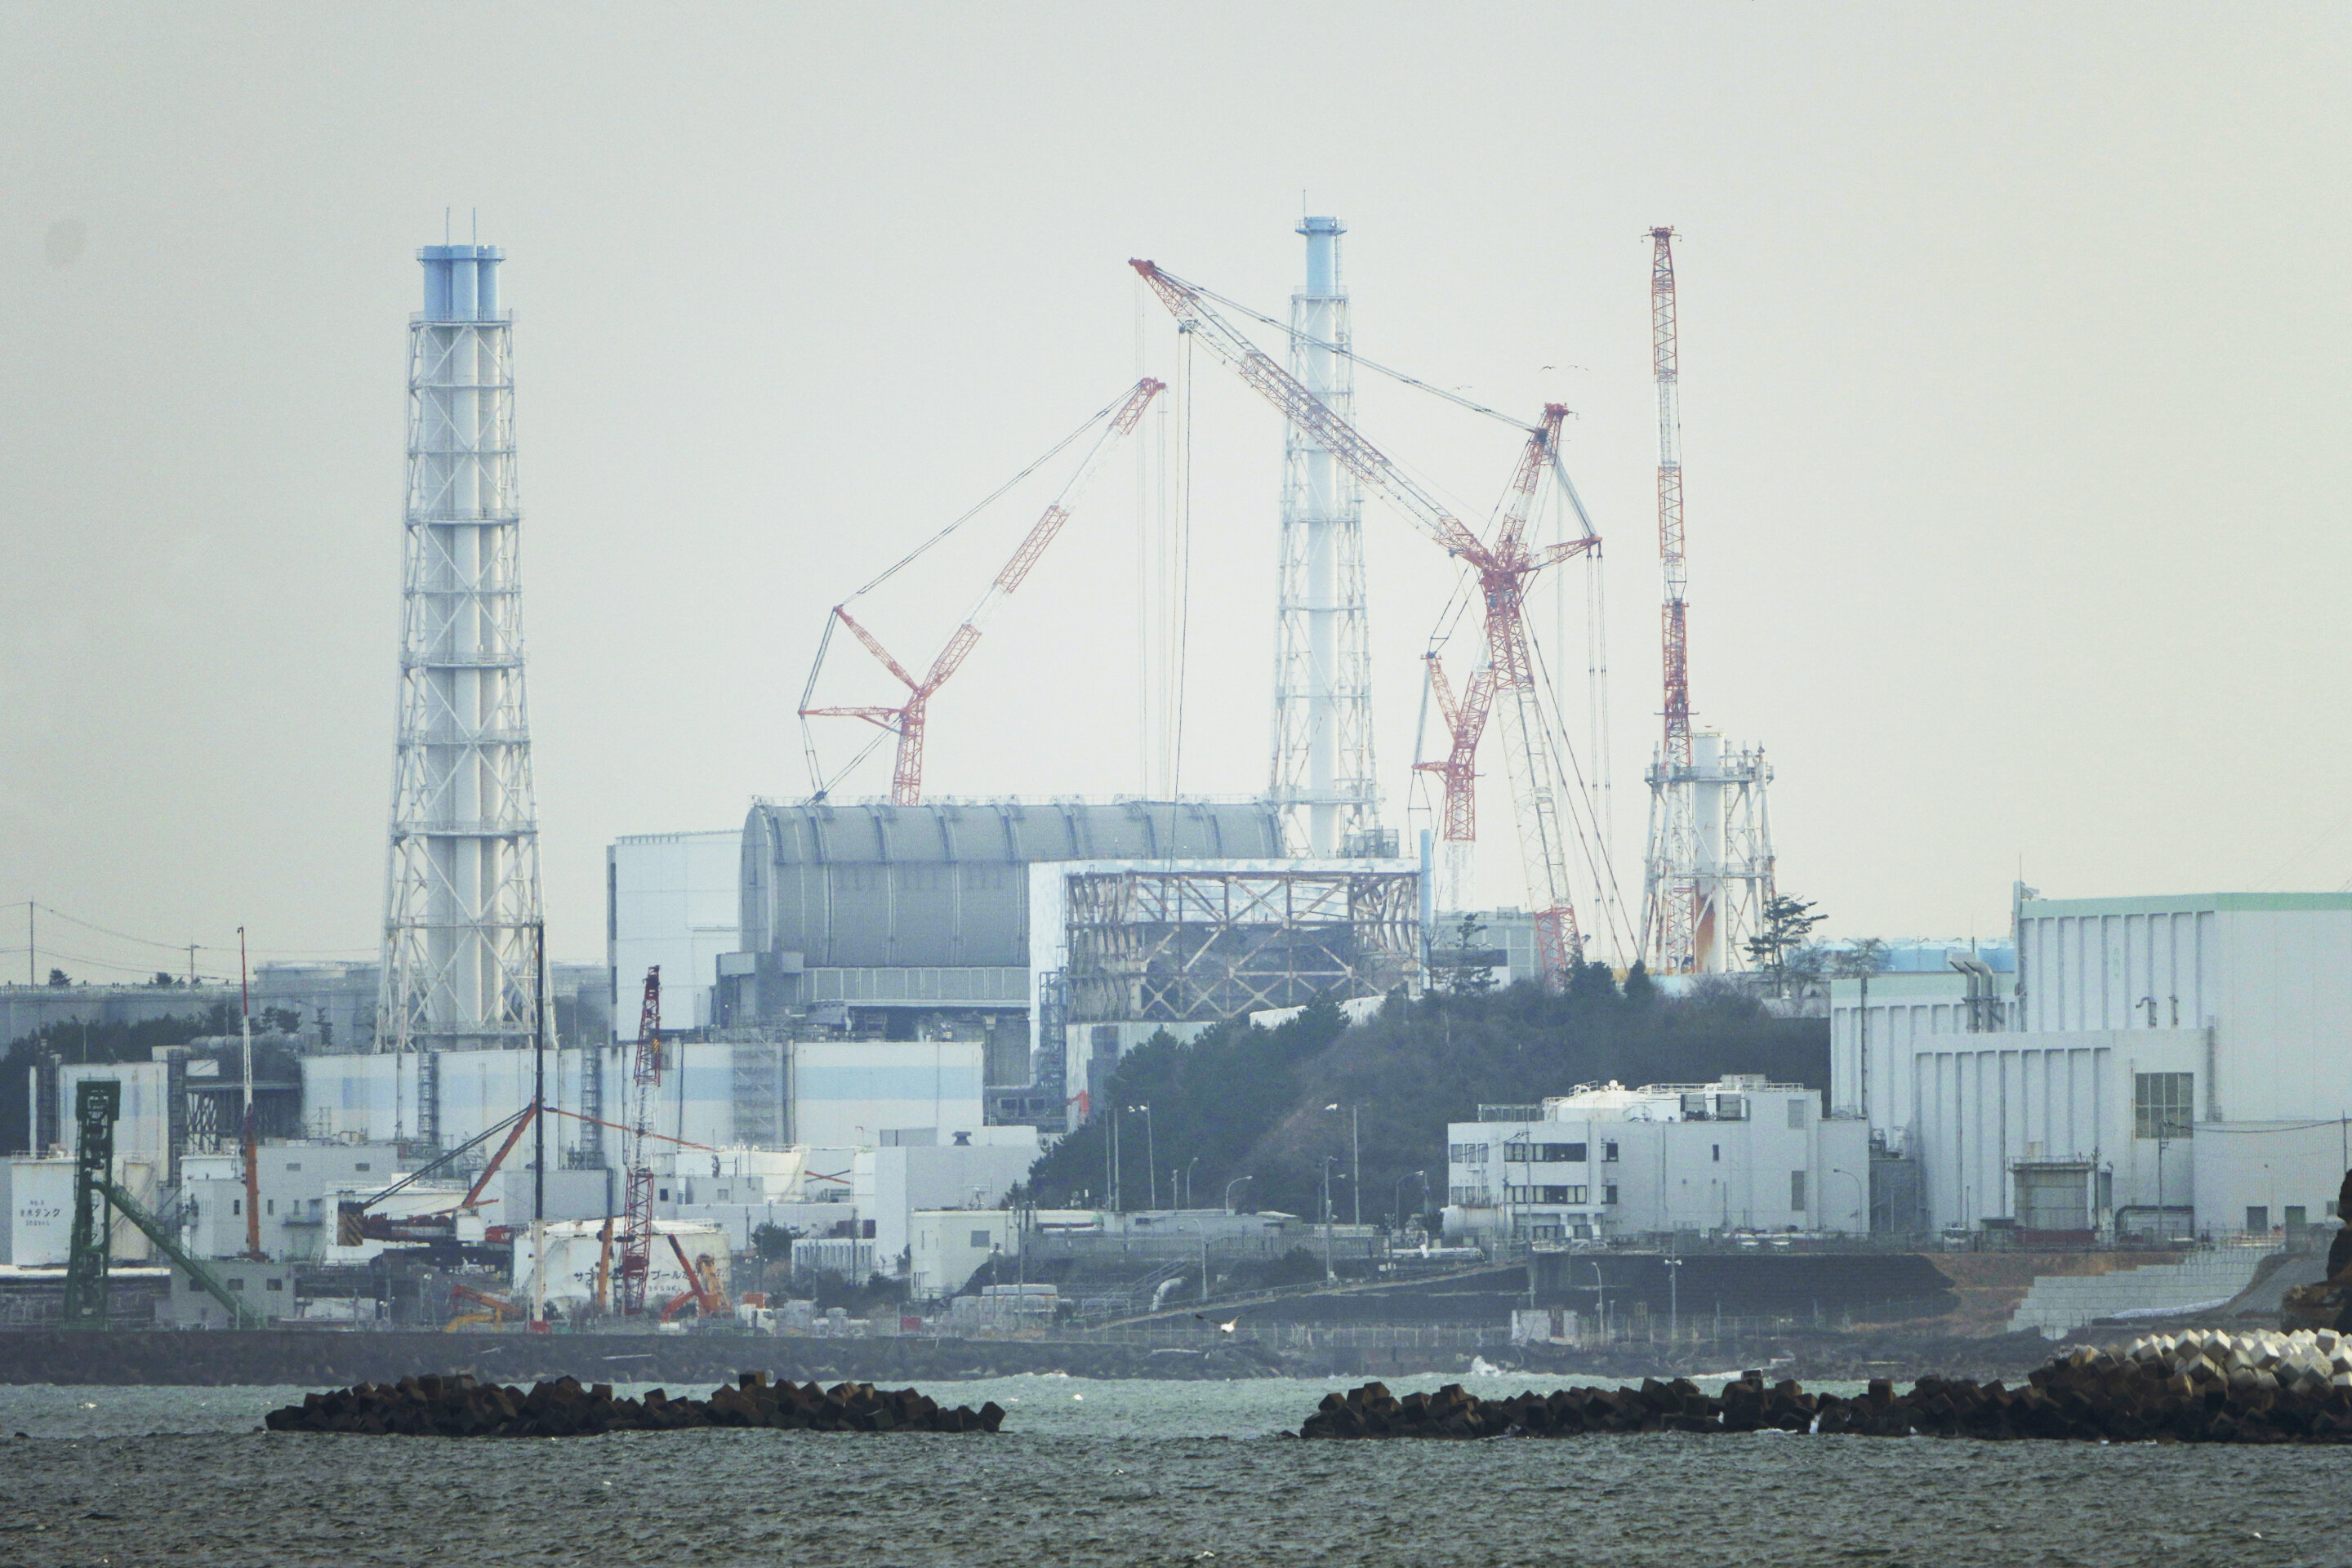 #IAEA says Fukushima water release to follow safety standards